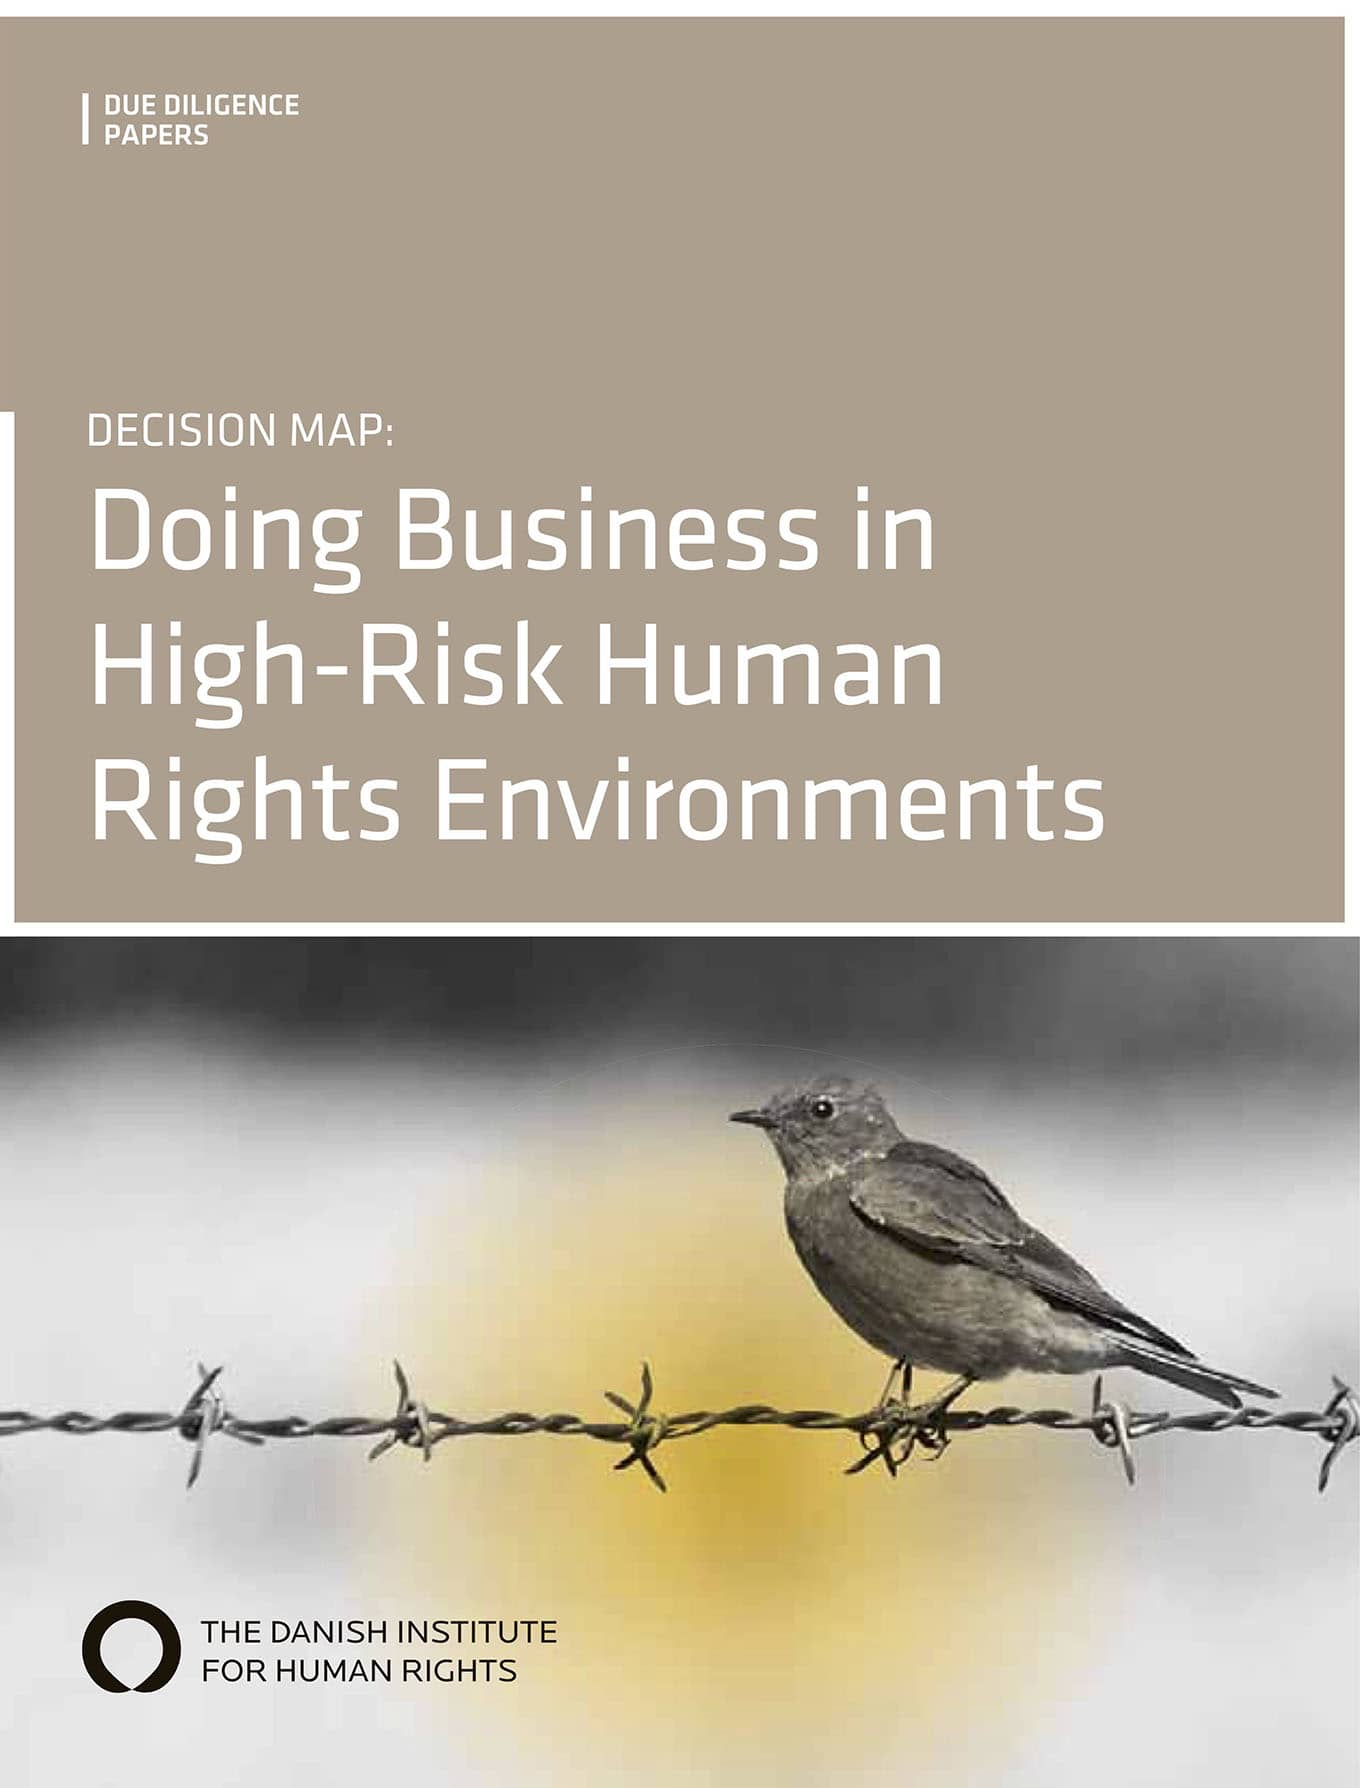 Decision Map: Doing Business in High-Risk Human Rights Environments (DIHR, 2010)